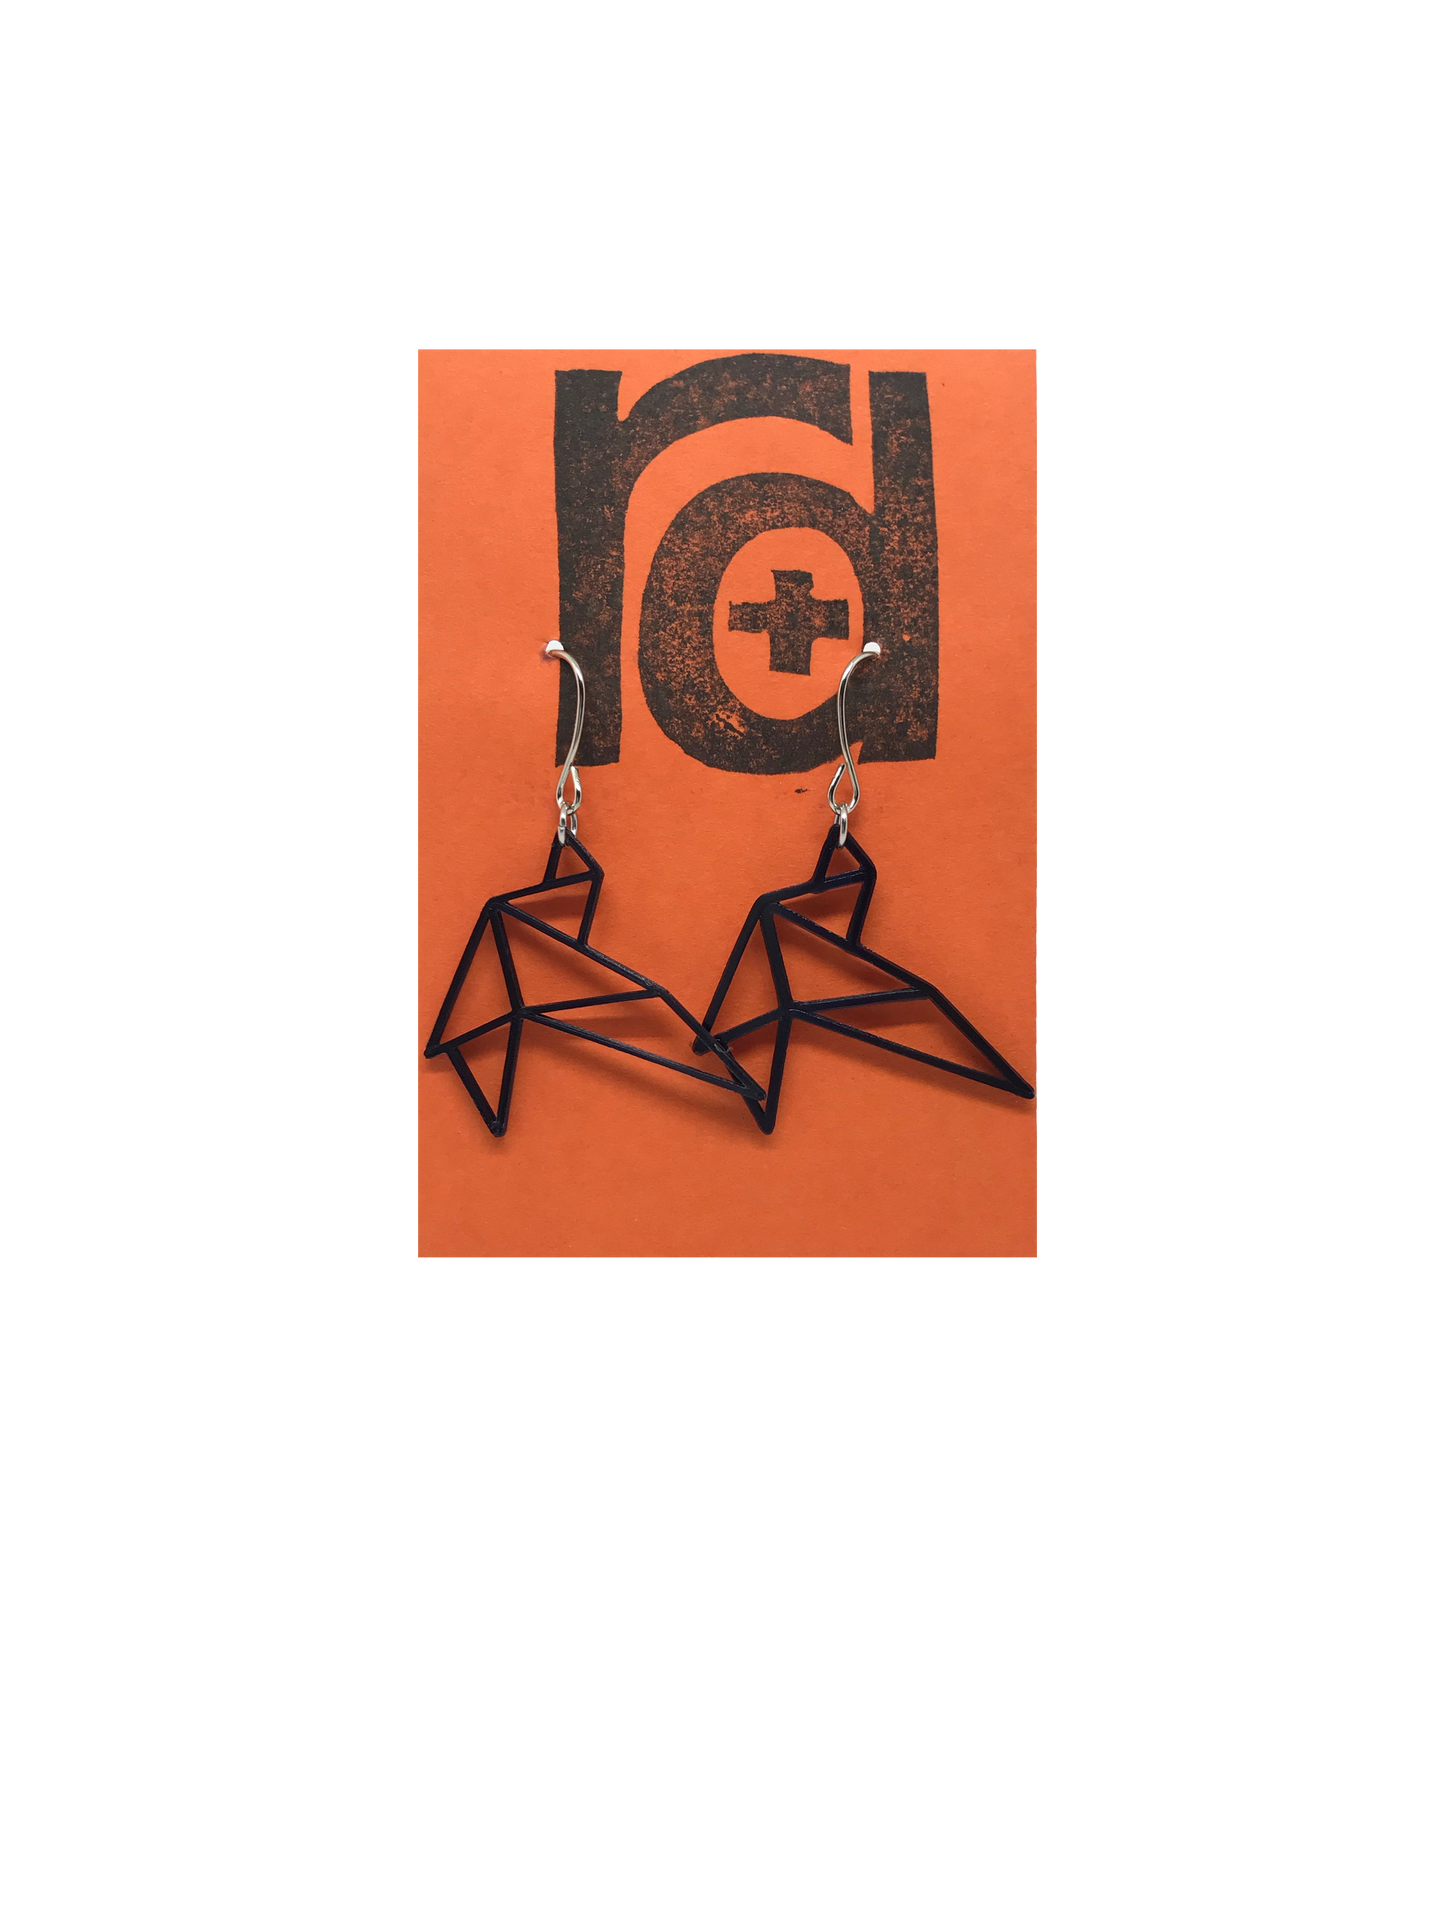 Shown on a bright orange earring card are two R+D earrings. They are geometric line shapes of birds flying. These sustainable 3D printed earrings are printed in black.